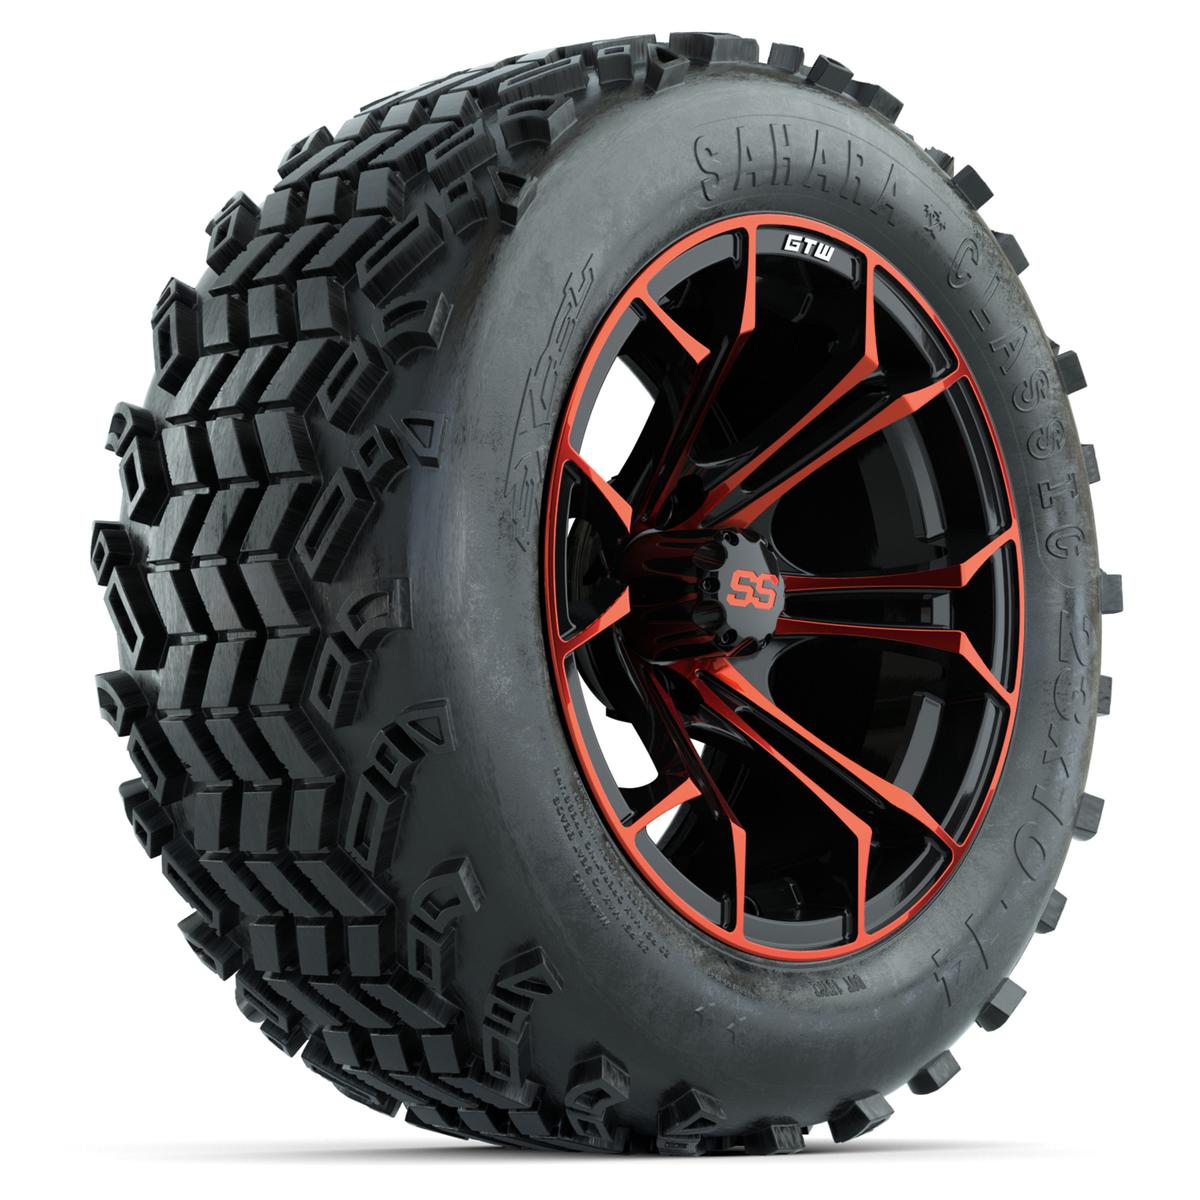 Set of (4) 14 in GTW Spyder Wheels with 23x10-14 Sahara Classic All-Terrain Tires